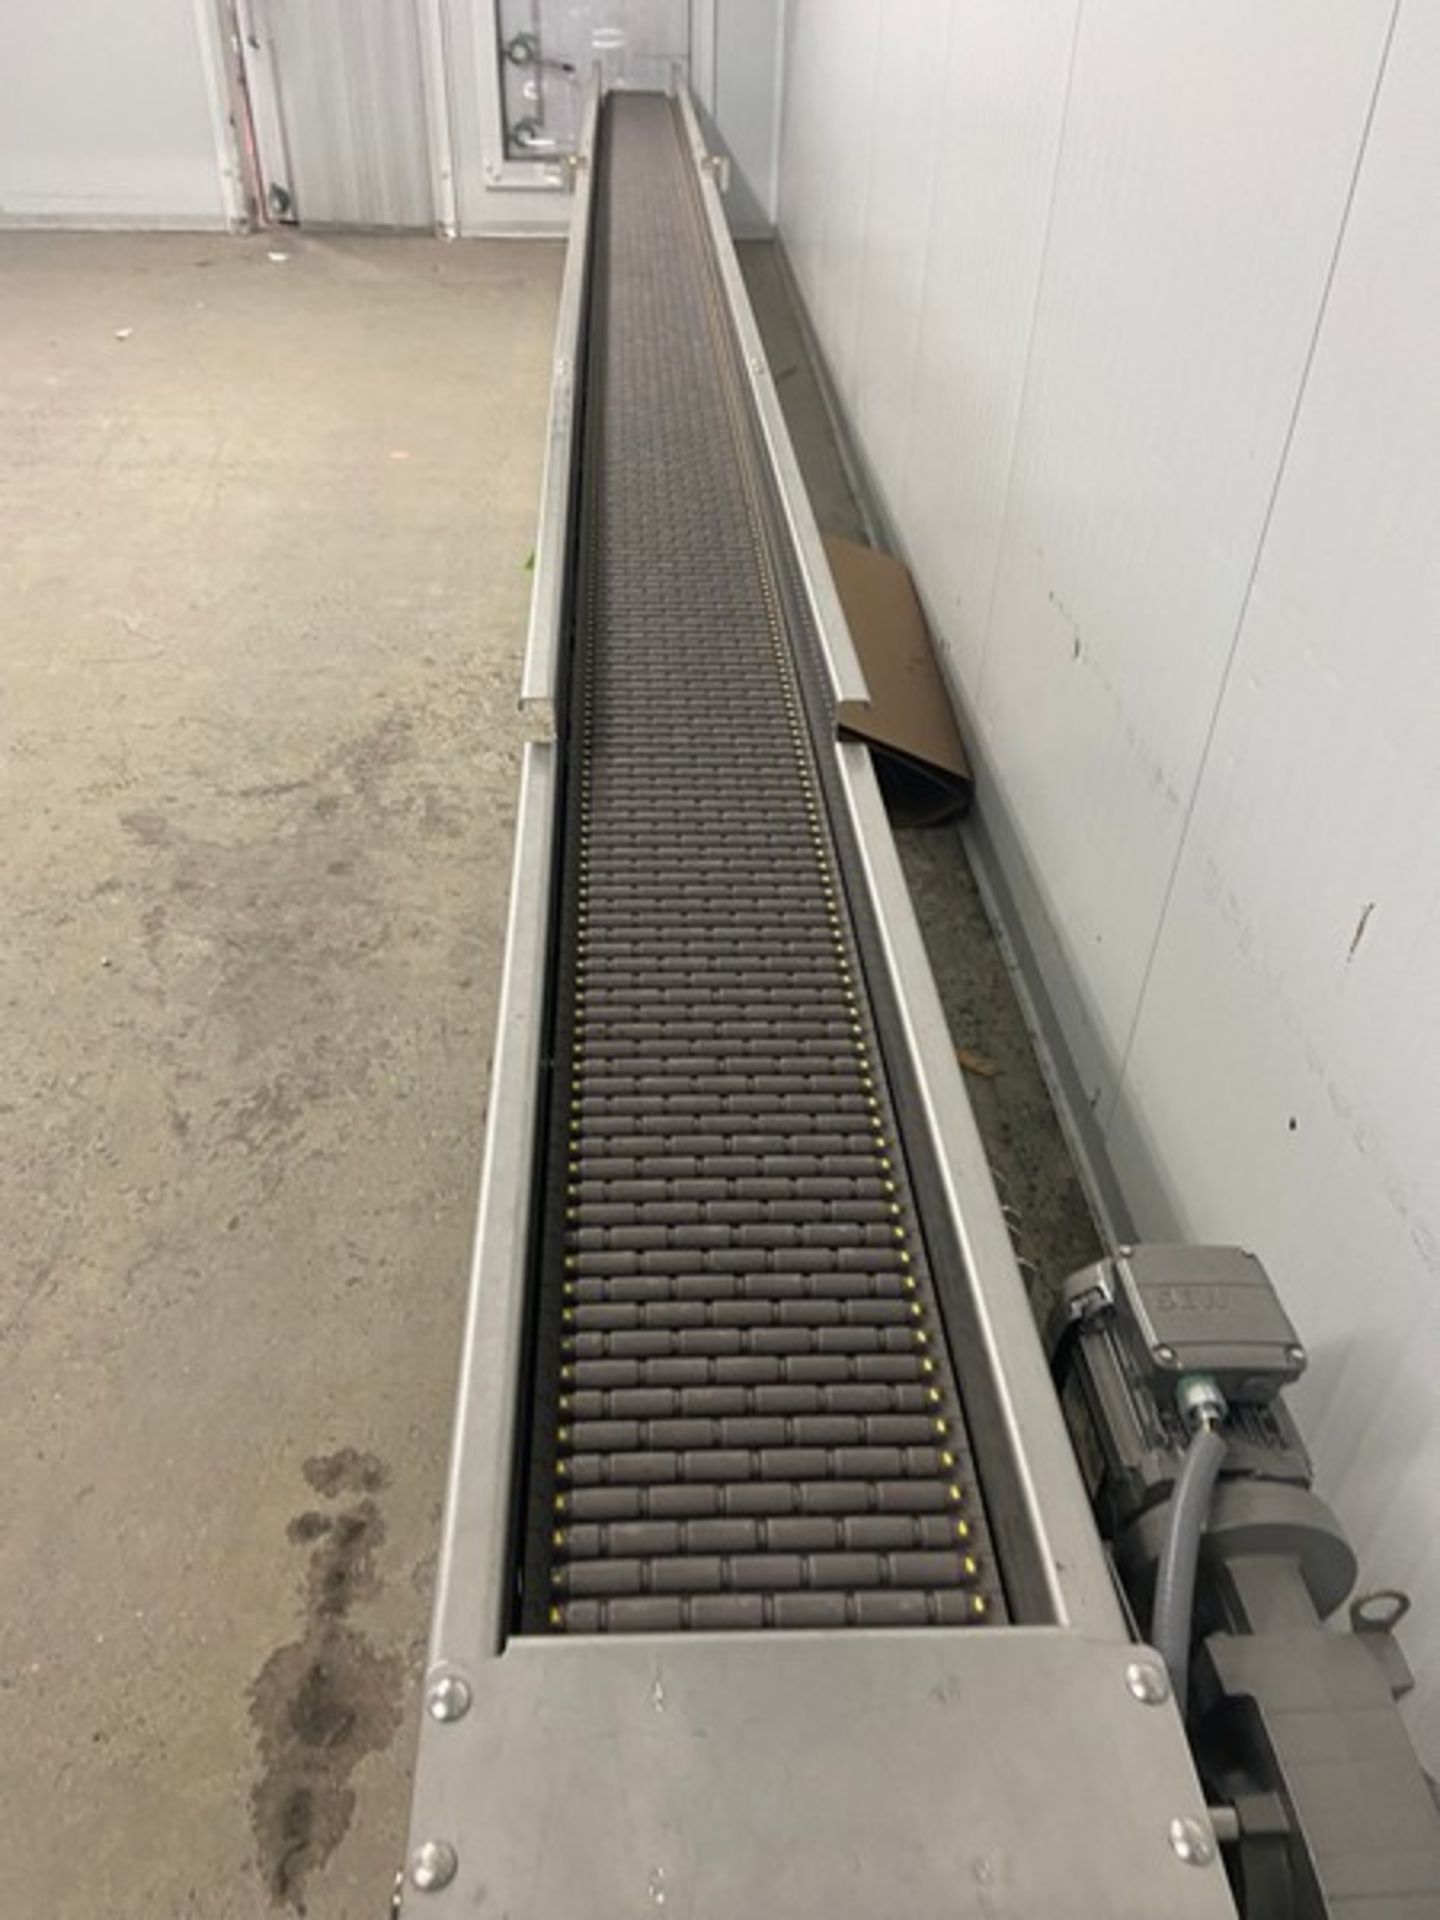 Straight Section of Roller Conveyor, Aprox. 290" L, with SEW Drive, with Square D Safety Switch, - Image 3 of 4